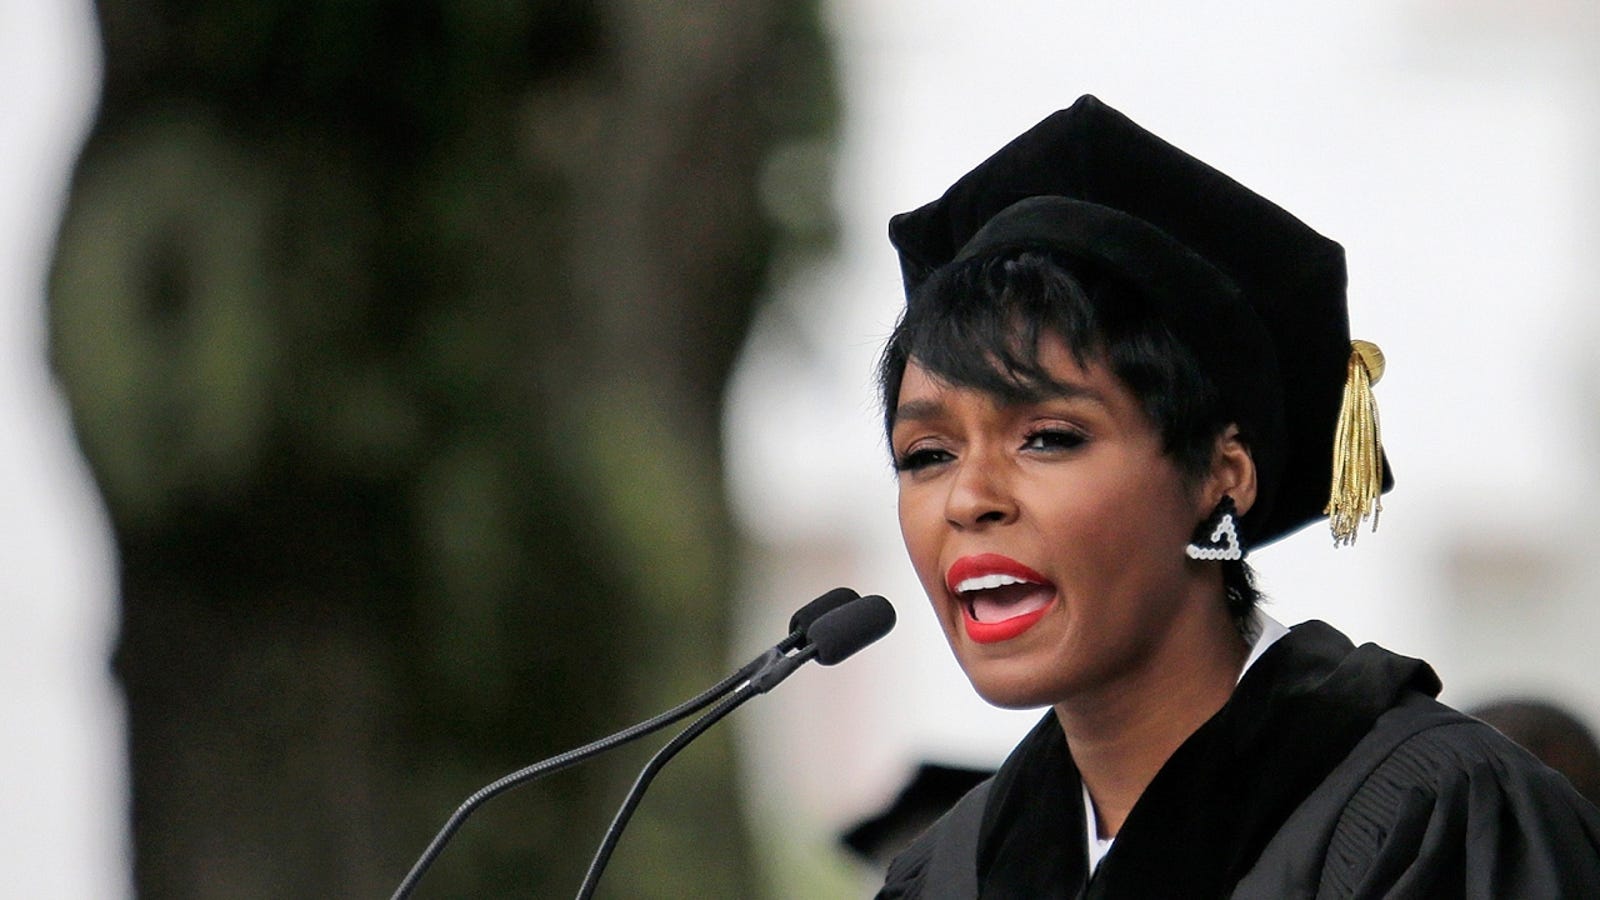 Janelle Monáe Receives Honorary Dillard University Degree, Delivers Commencement Speech